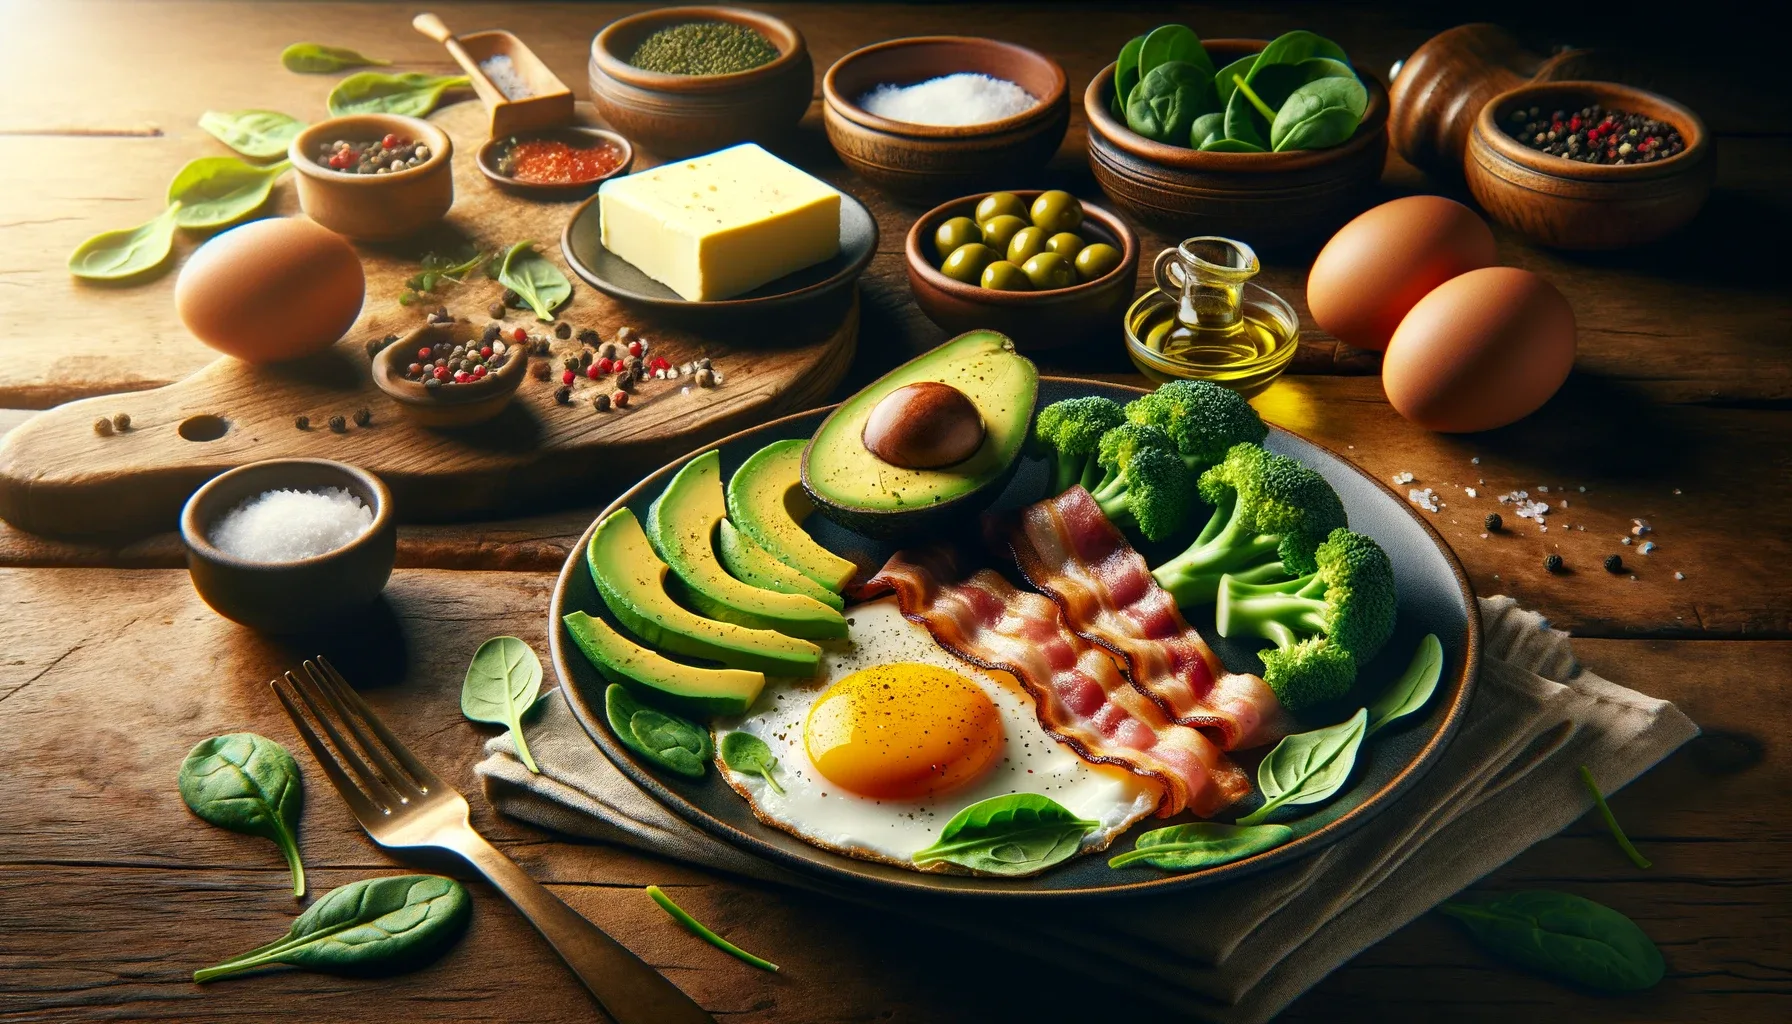 A display of ketogenic foods, including eggs, olives, avocados, bacon and butter